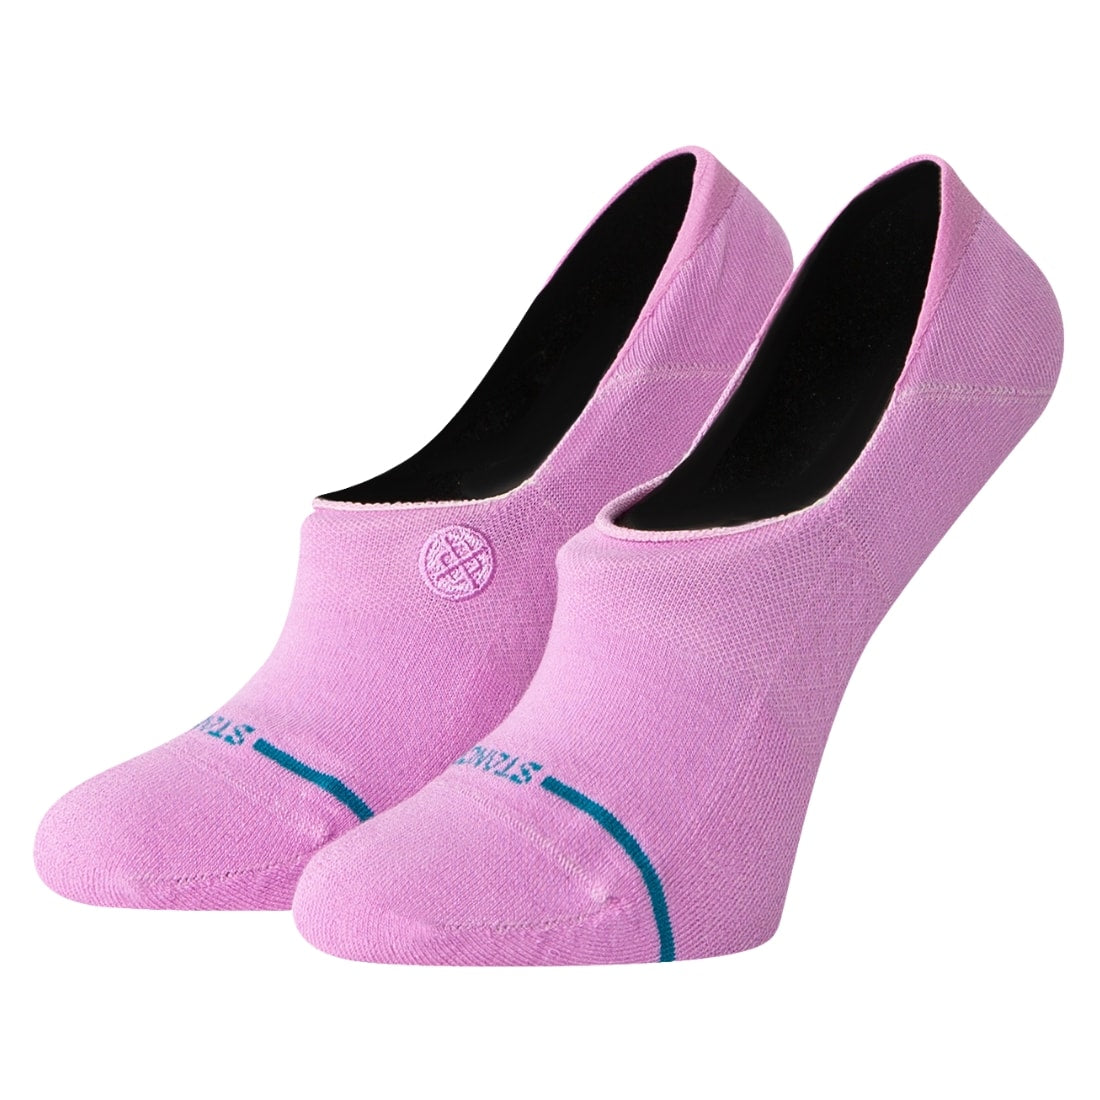 Stance Womens Icon No Show Socks - Lilac Rose - Womens Invisible/No Show Socks by Stance